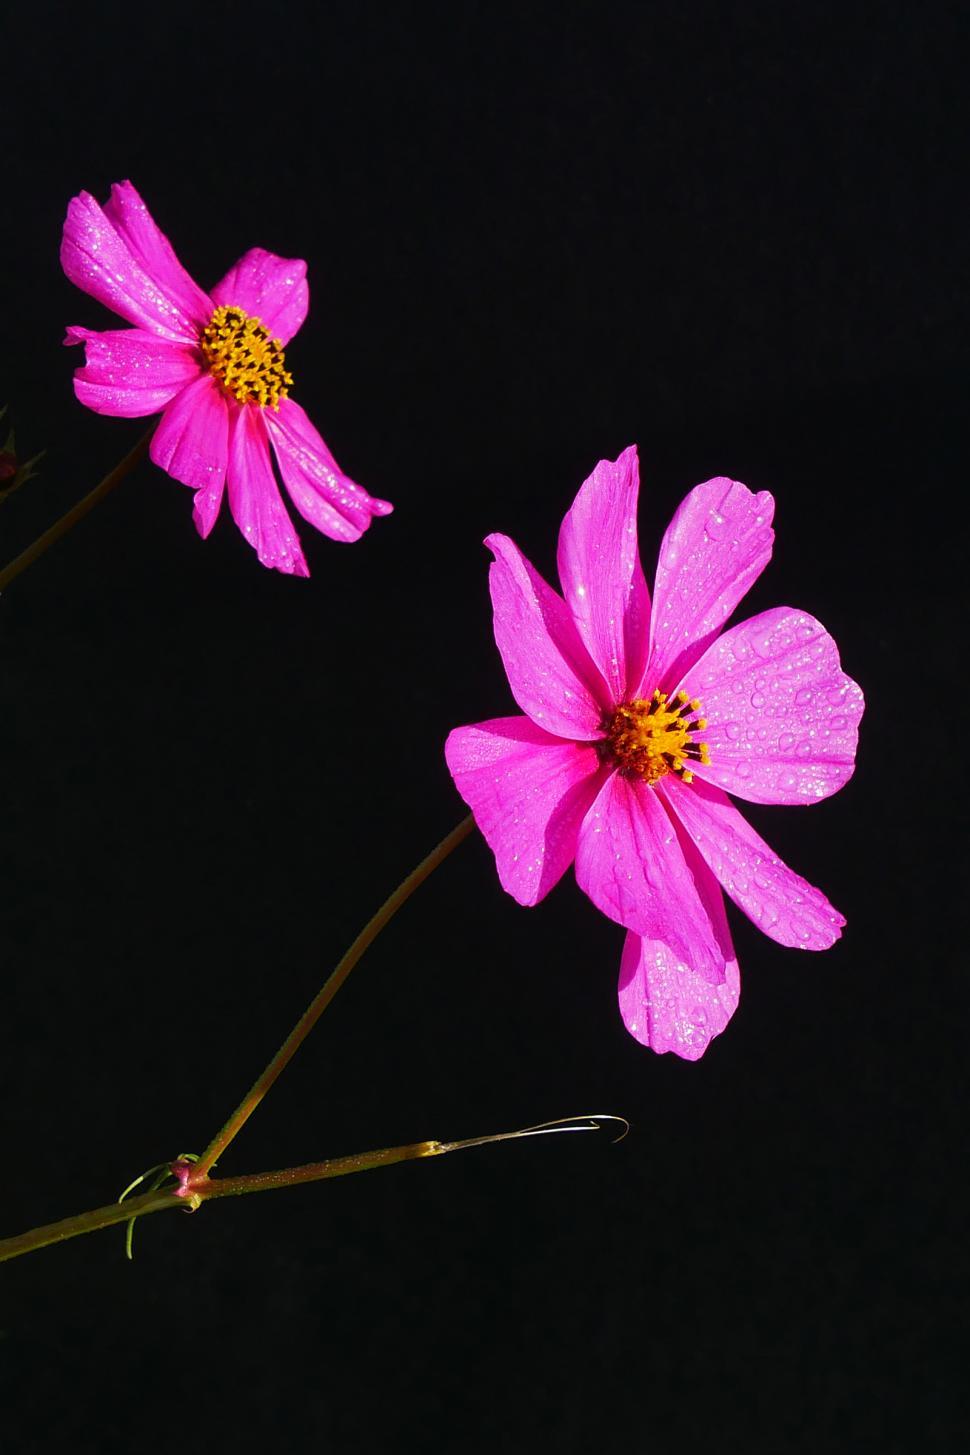 Free Image of Two Pink Cosmos Flowers 